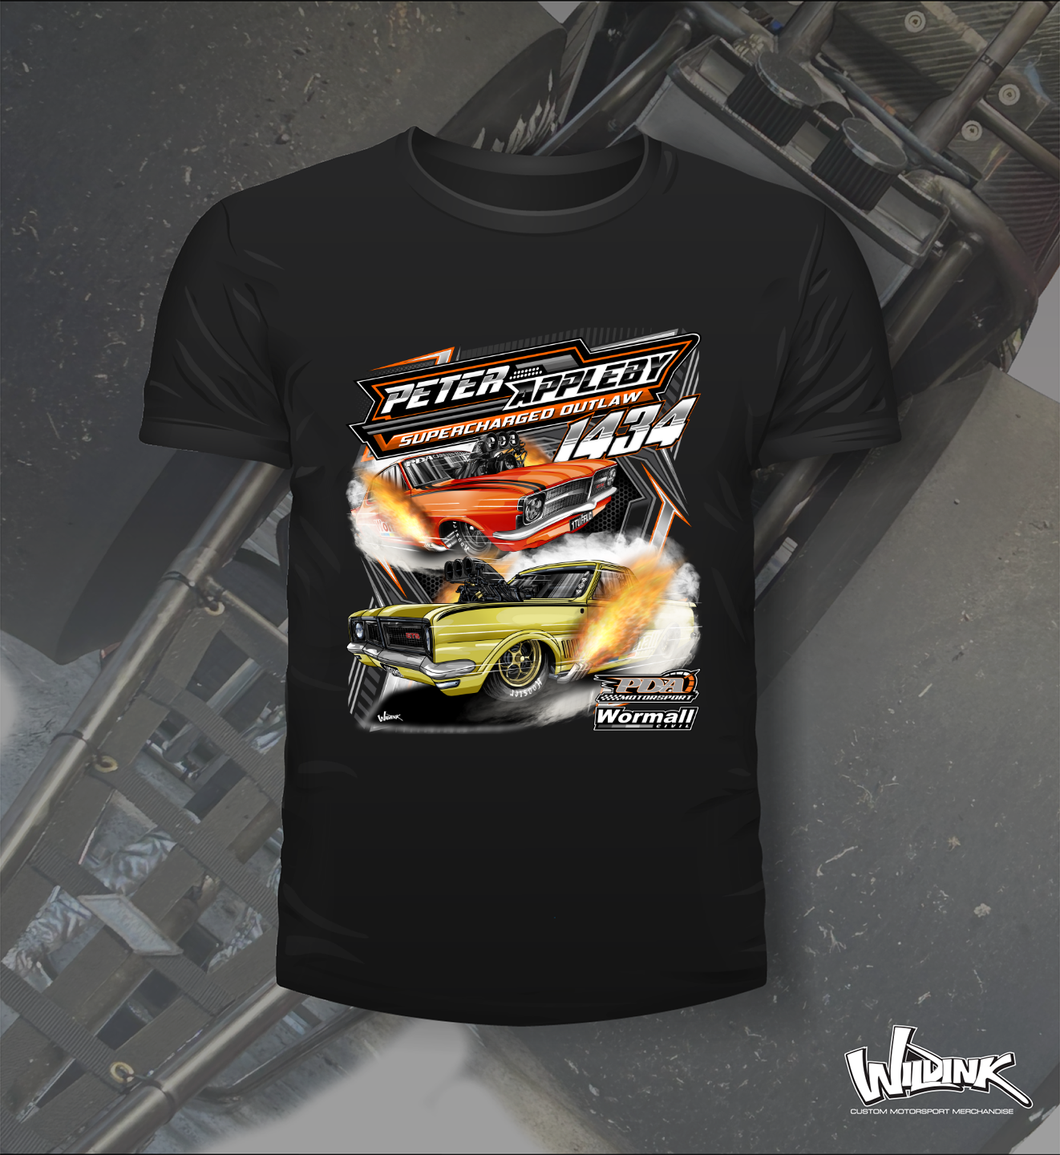 Peter Appleby - PDA Motorsport - Supercharged Outlaw - Tee Shirt